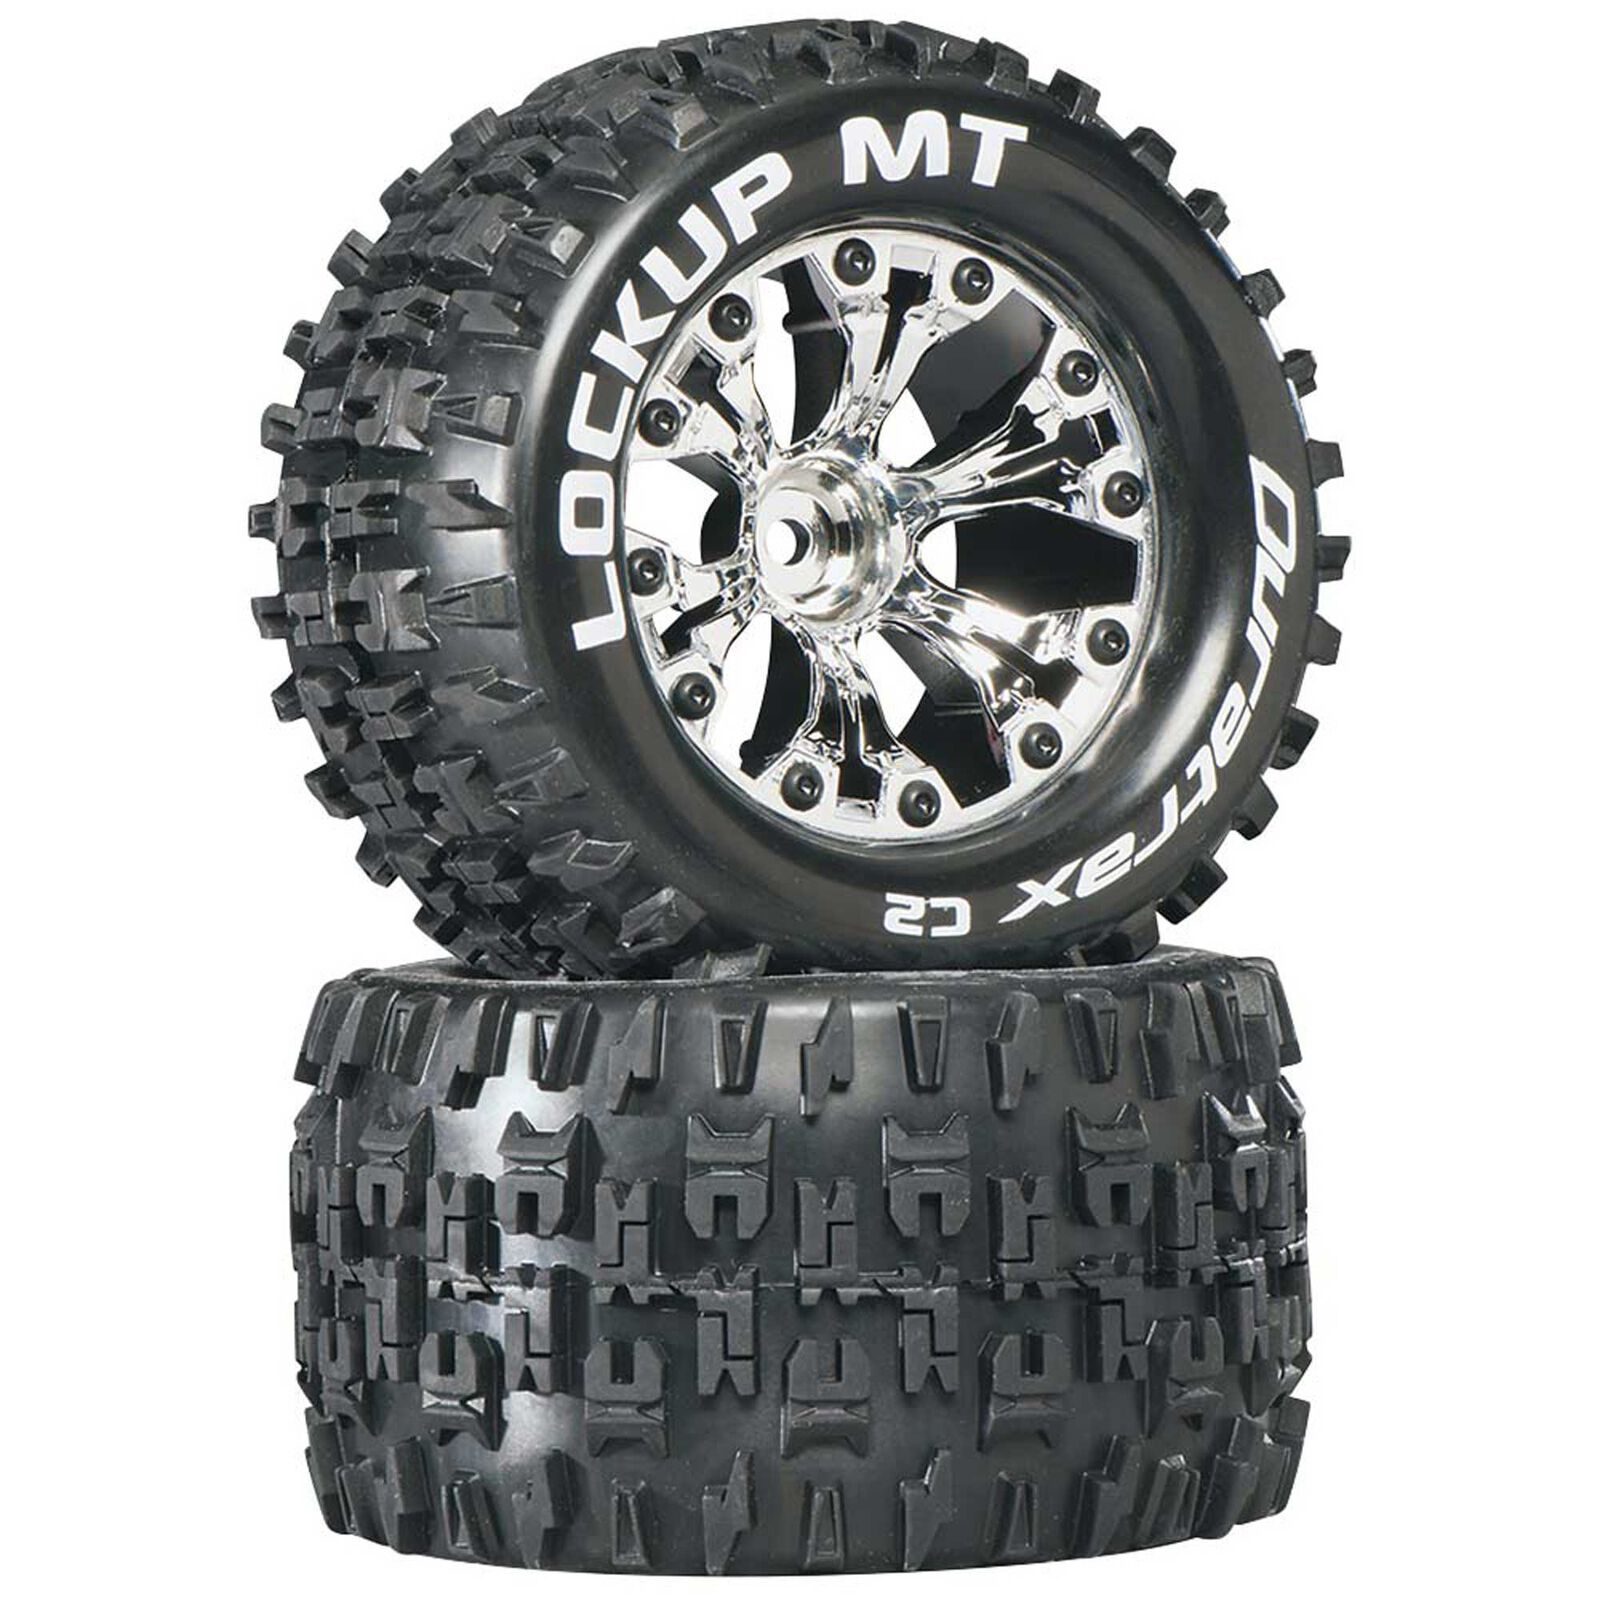 Lockup MT 2.8" 2WD Mounted 1/2" Offset Tires, Chrome (2)